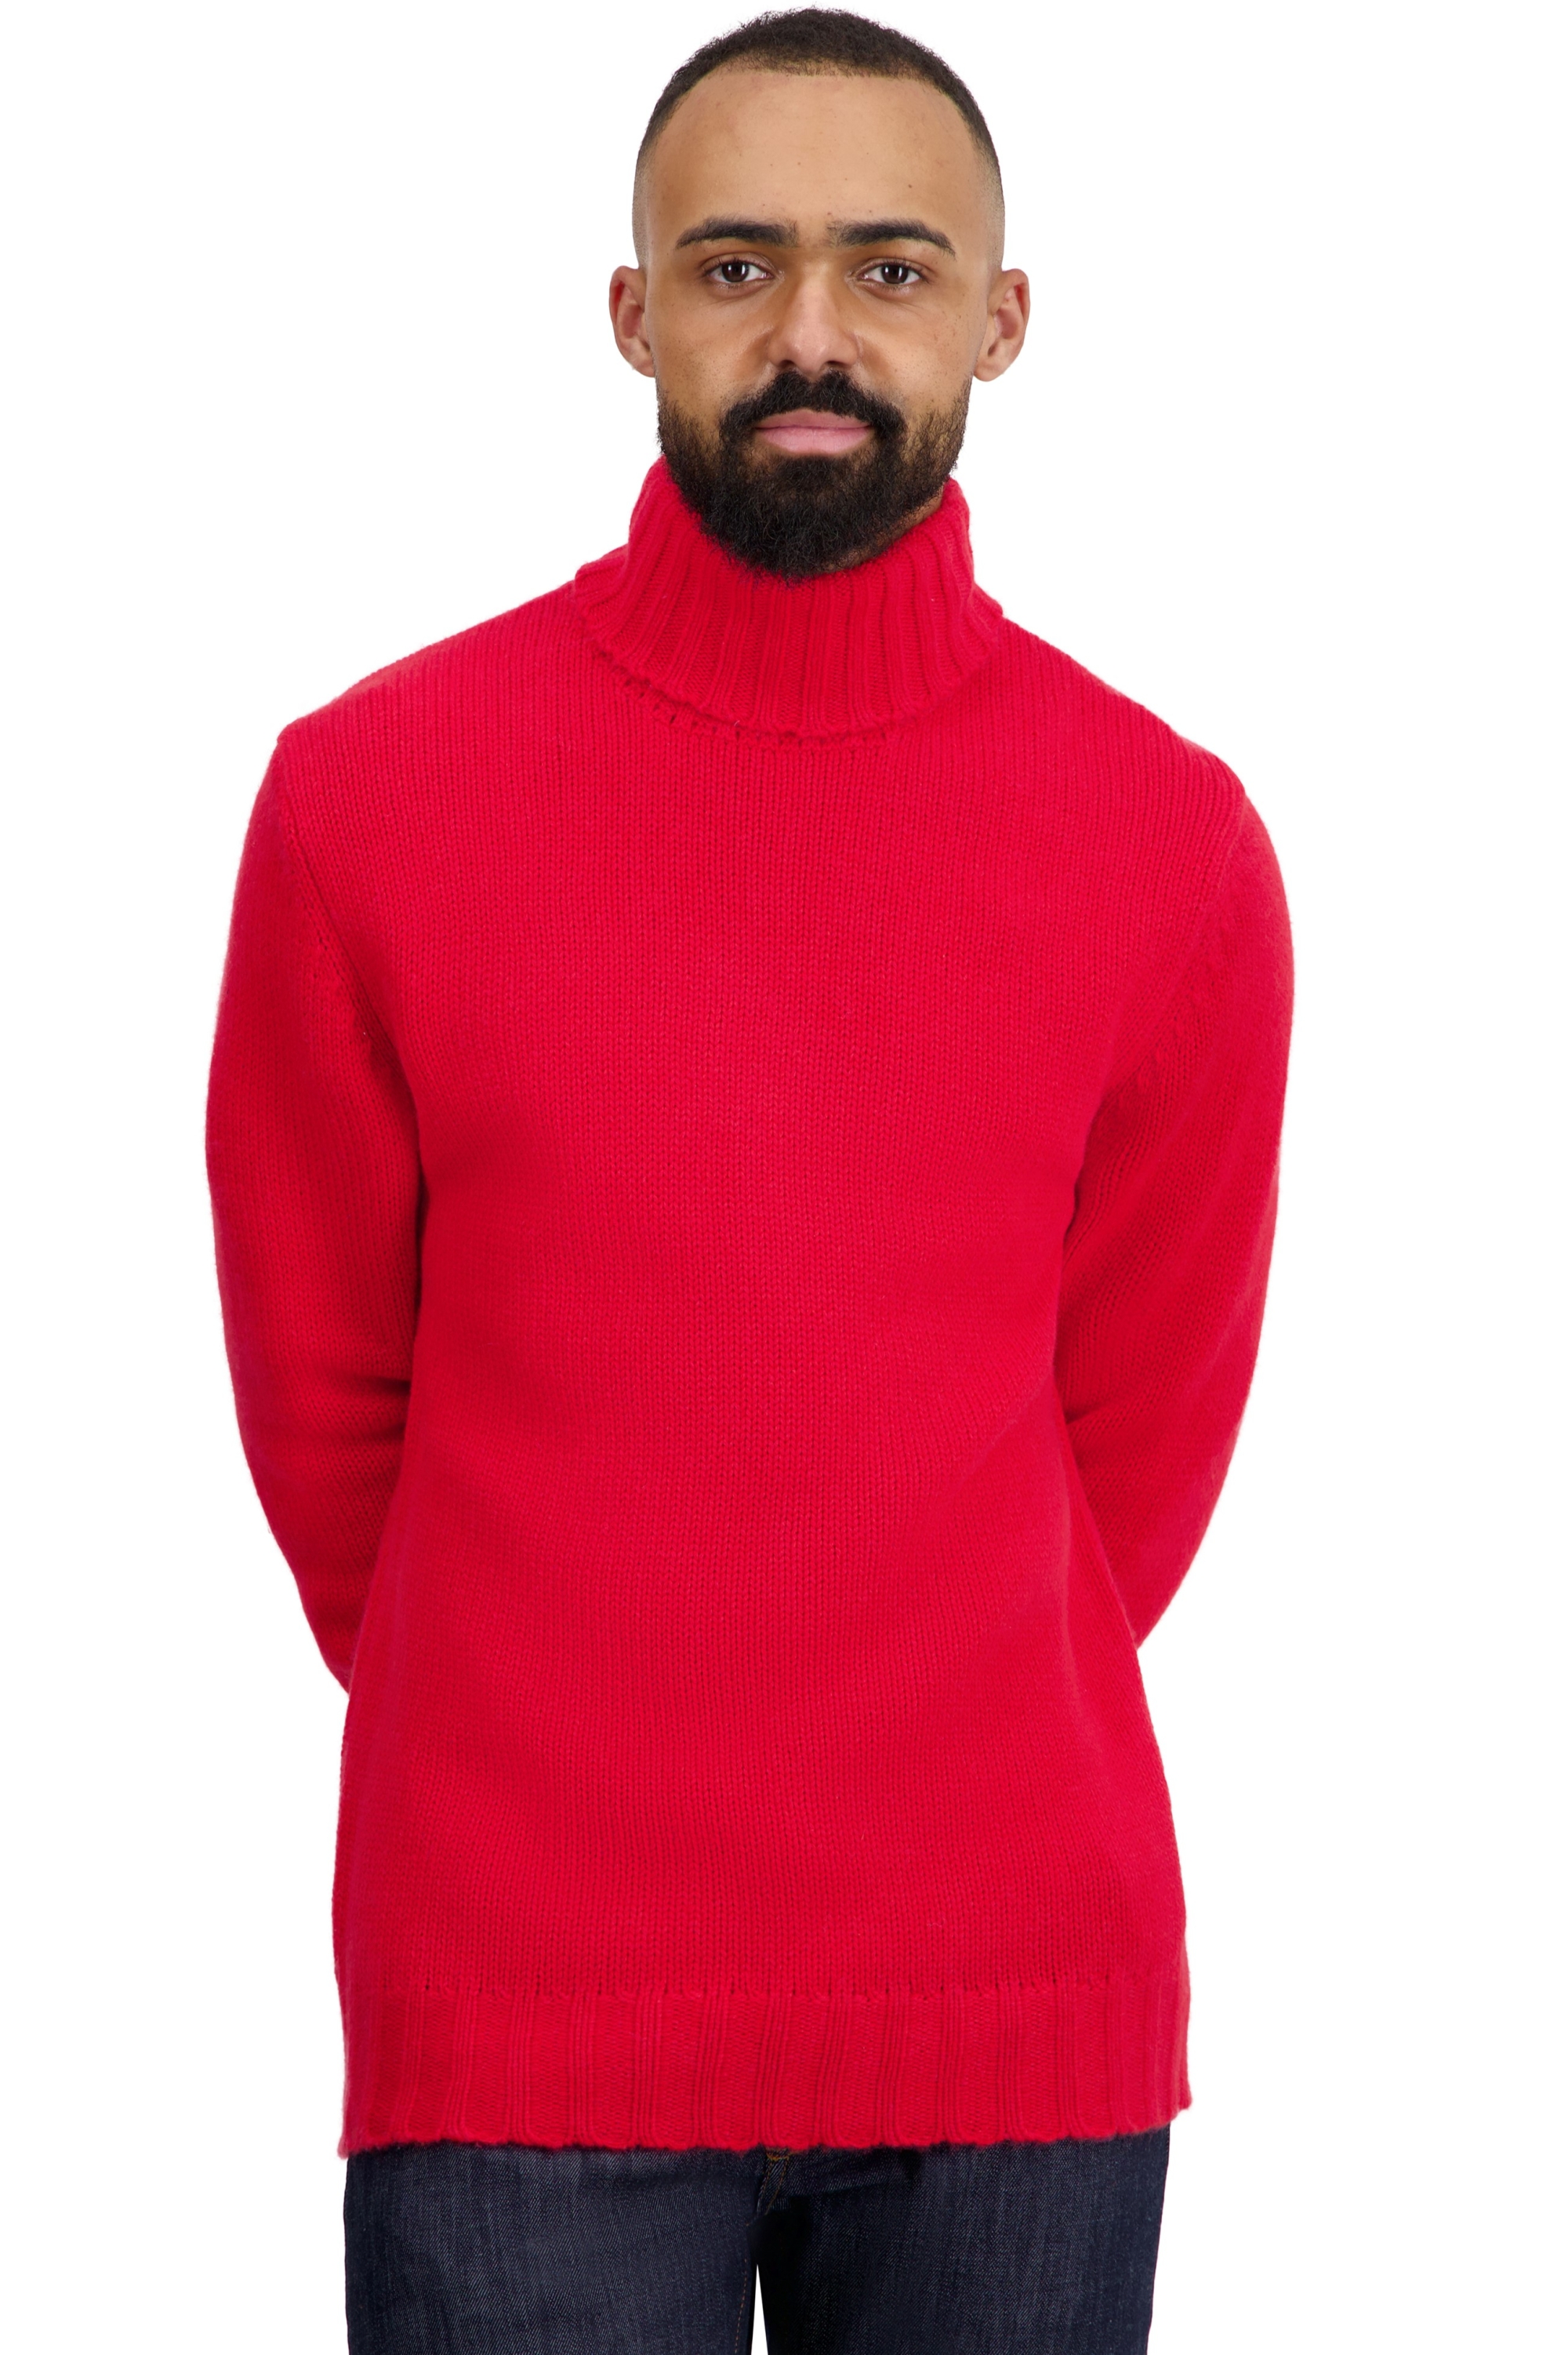 Cashmere men chunky sweater achille rouge 3xl